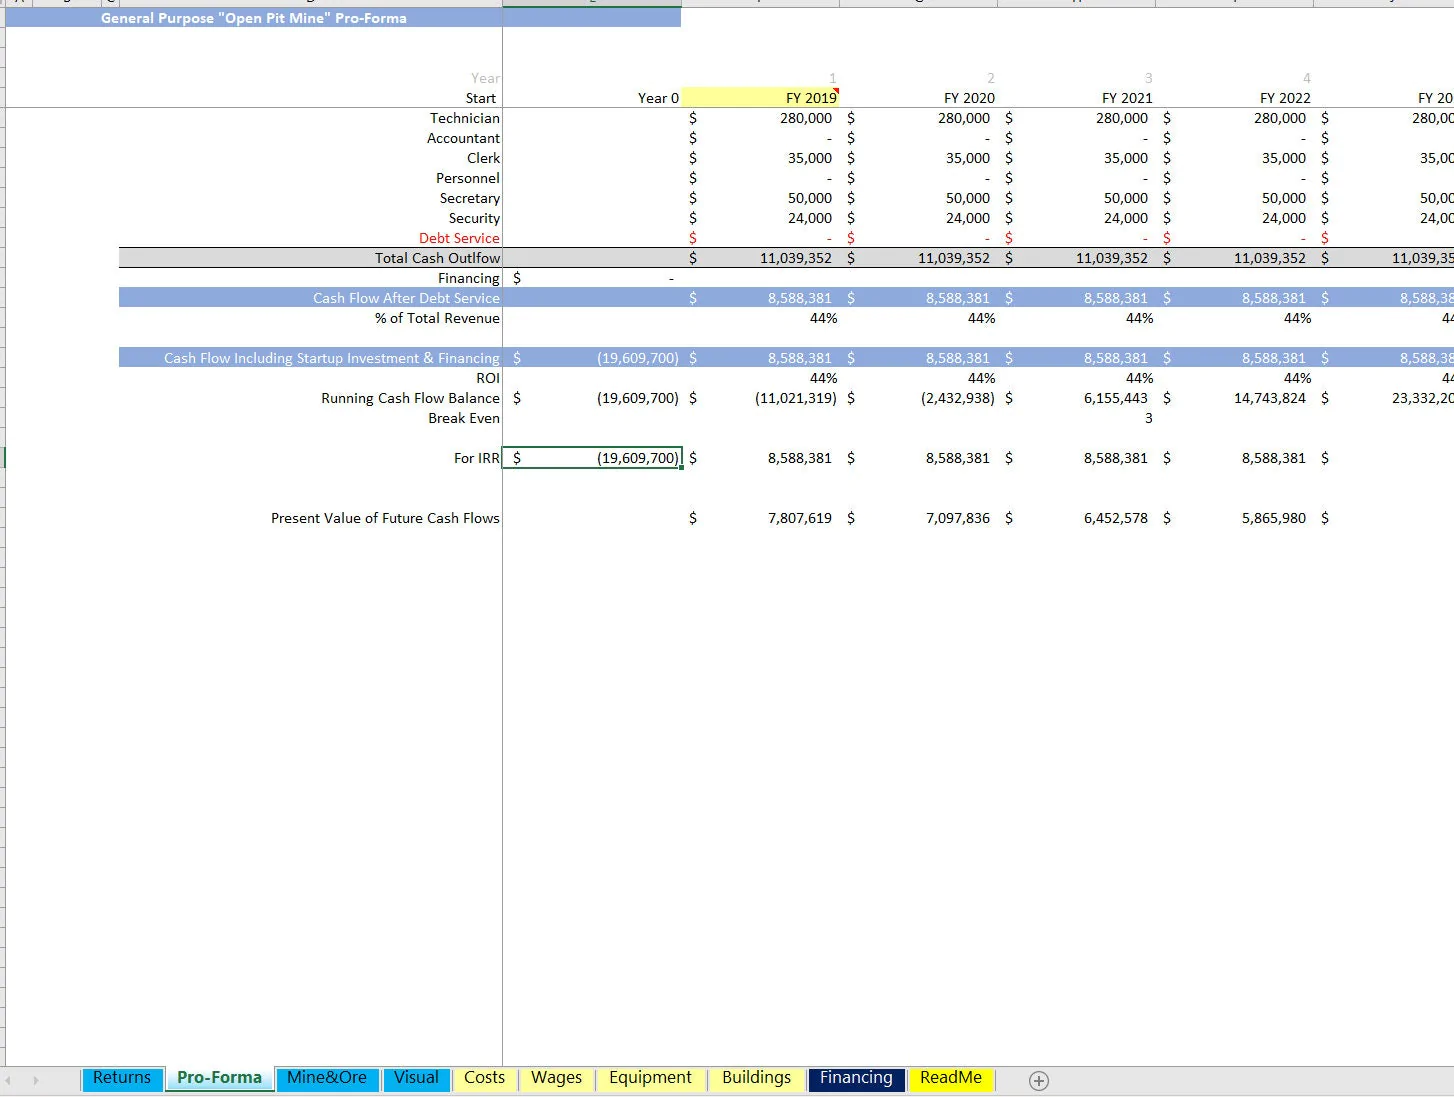 Mining Financial Model: Ore, Gems, Minerals (Excel workbook (XLSX)) Preview Image